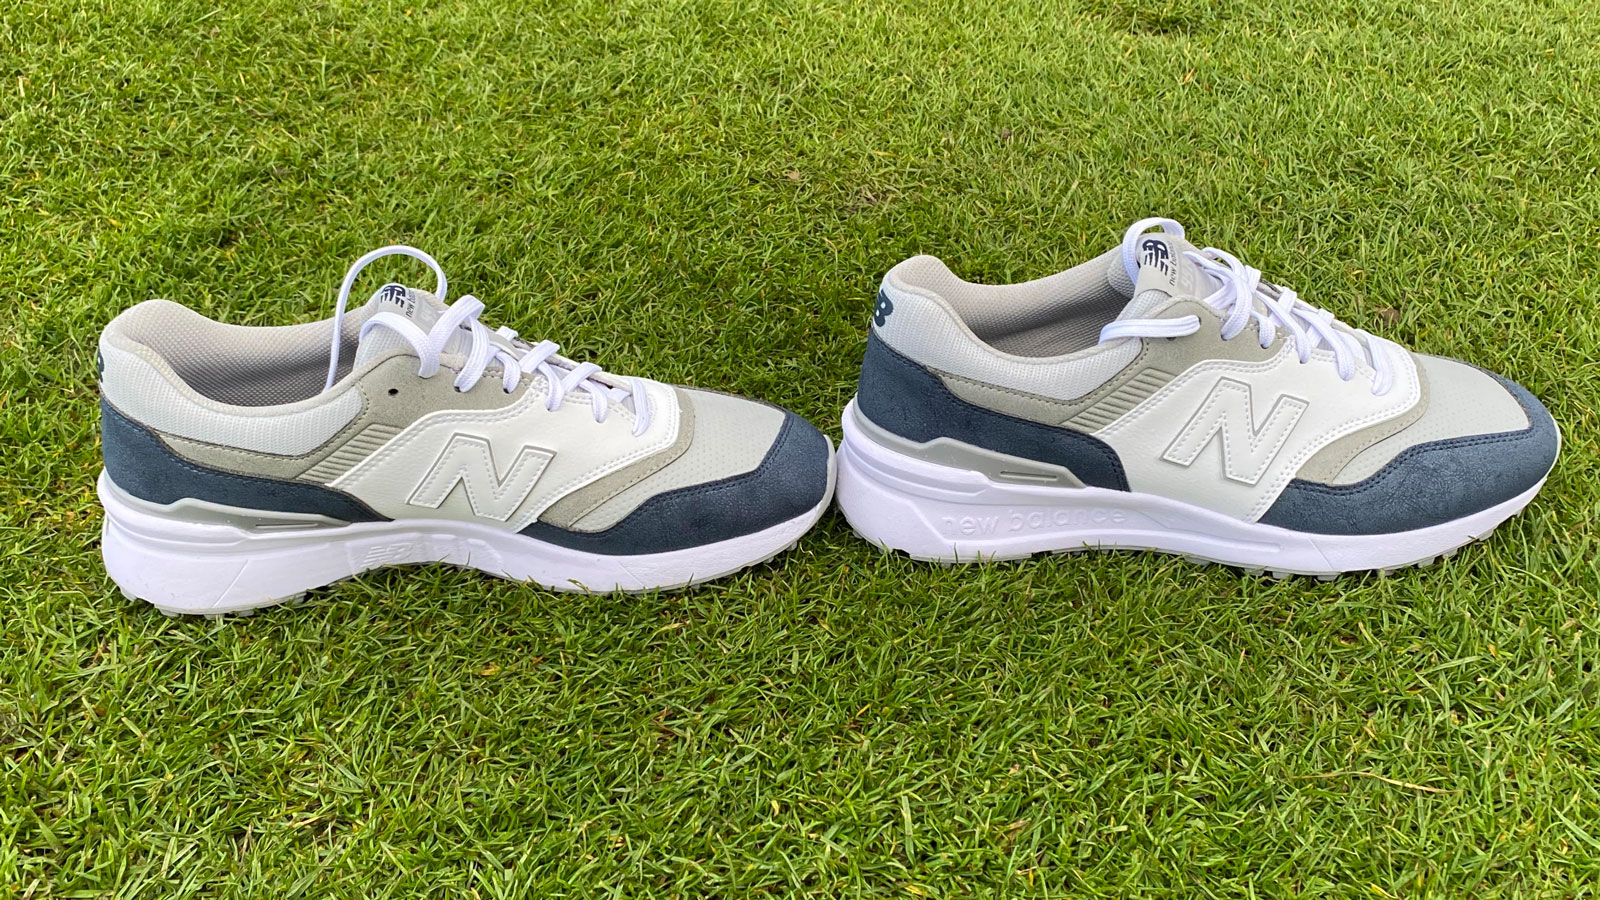 The New Balance 997 SL Golf Shoes side by side